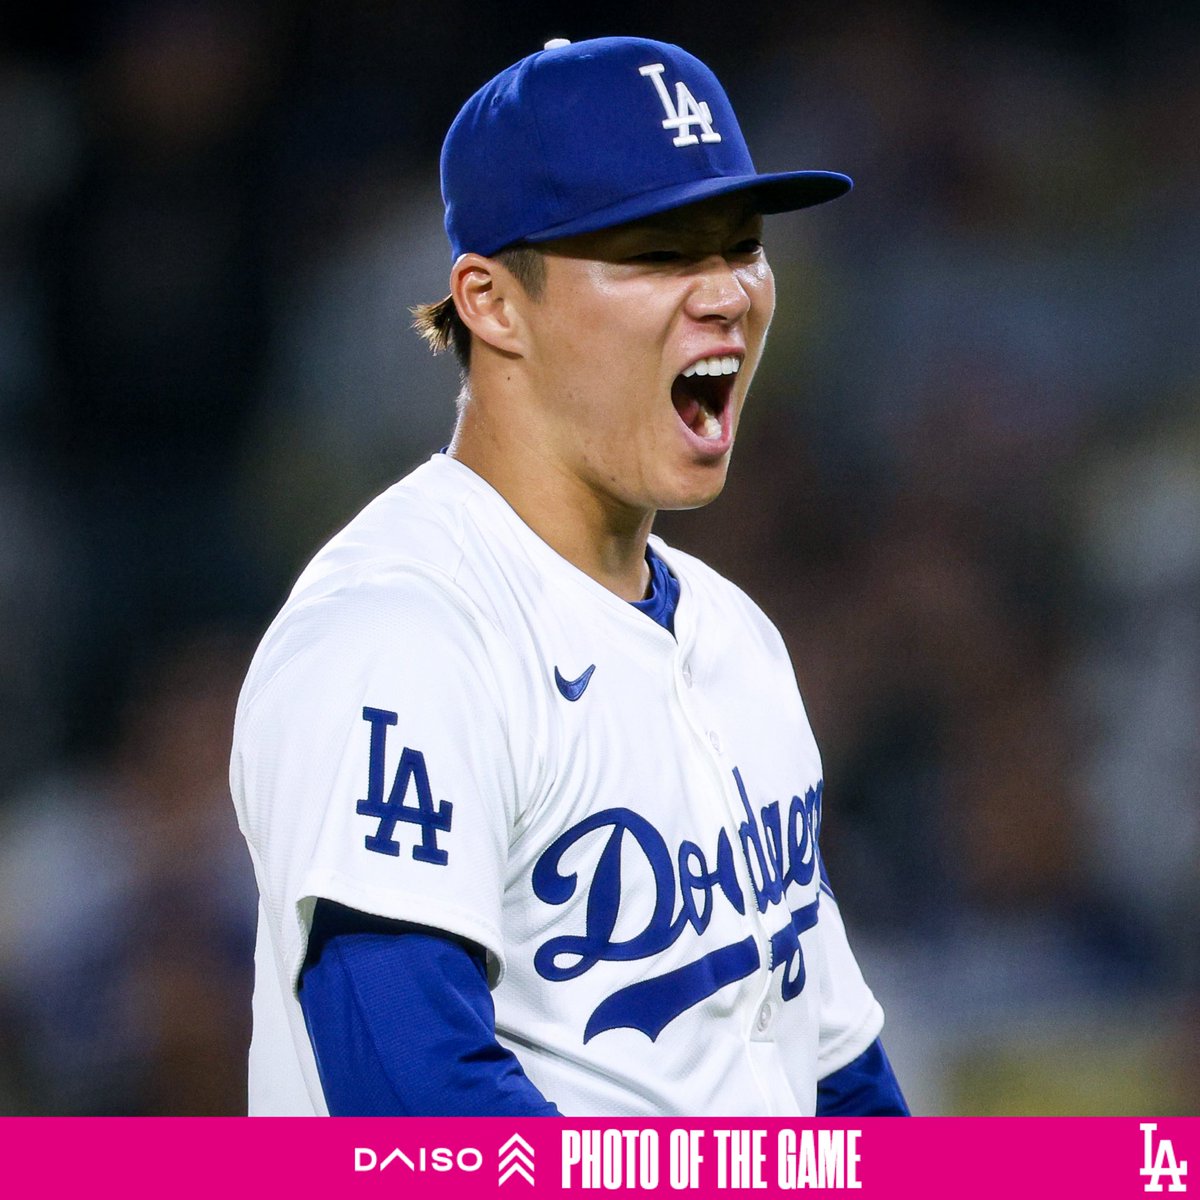 Tonight’s Photo of the Game presented by Daiso.